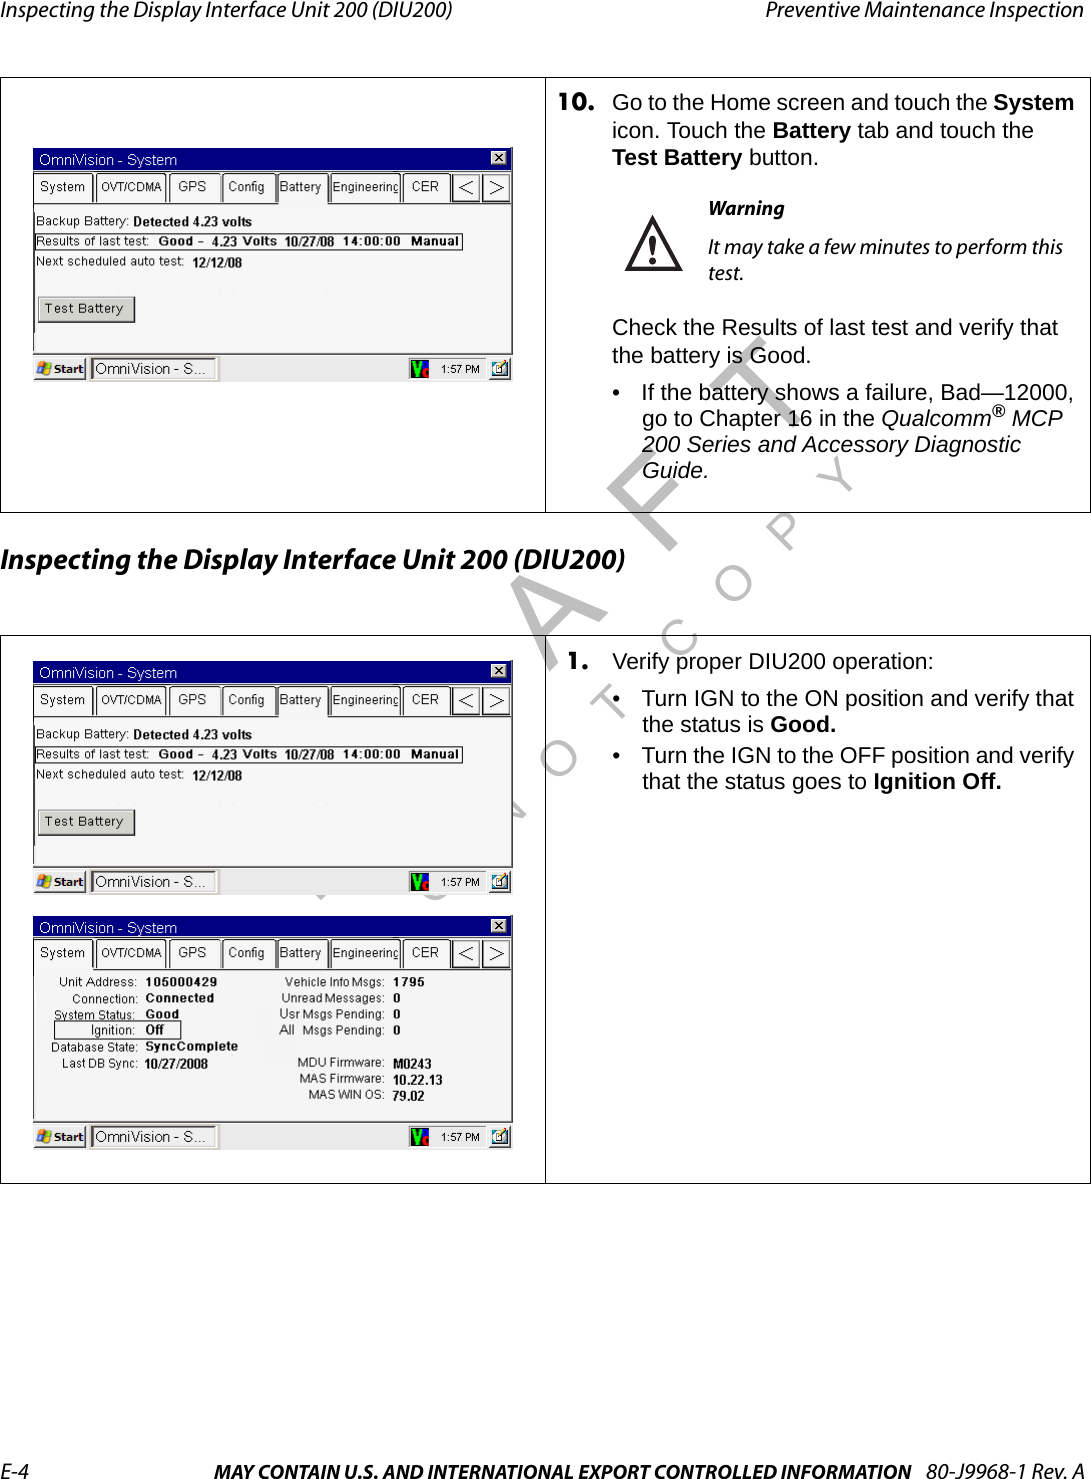 Inspecting the Display Interface Unit 200 (DIU200) Preventive Maintenance InspectionE-4 MAY CONTAIN U.S. AND INTERNATIONAL EXPORT CONTROLLED INFORMATION 80-J9968-1 Rev. ADO NOT COPYInspecting the Display Interface Unit 200 (DIU200)10. Go to the Home screen and touch the System icon. Touch the Battery tab and touch the Test Battery button.WarningIt may take a few minutes to perform this test.Check the Results of last test and verify that the battery is Good.• If the battery shows a failure, Bad—12000, go to Chapter 16 in the Qualcomm® MCP 200 Series and Accessory Diagnostic Guide.1. Verify proper DIU200 operation:• Turn IGN to the ON position and verify that the status is Good.• Turn the IGN to the OFF position and verify that the status goes to Ignition Off.